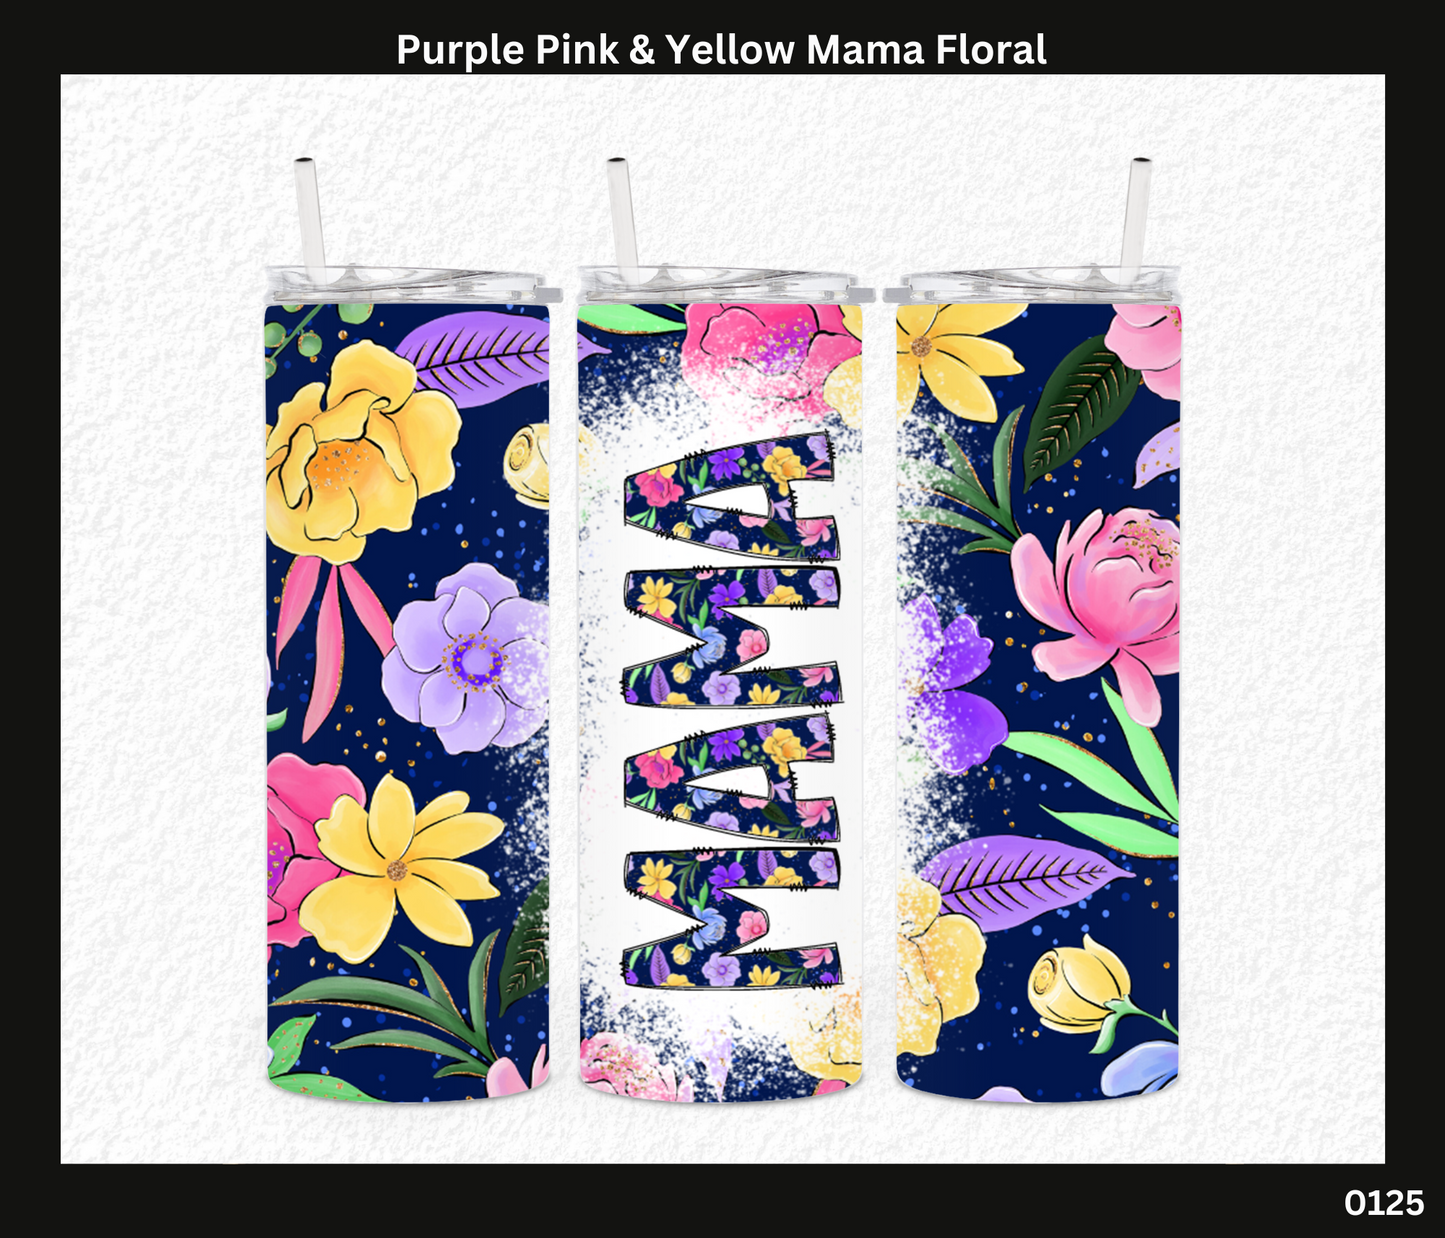 Purple Pink & Yellow Floral Mama